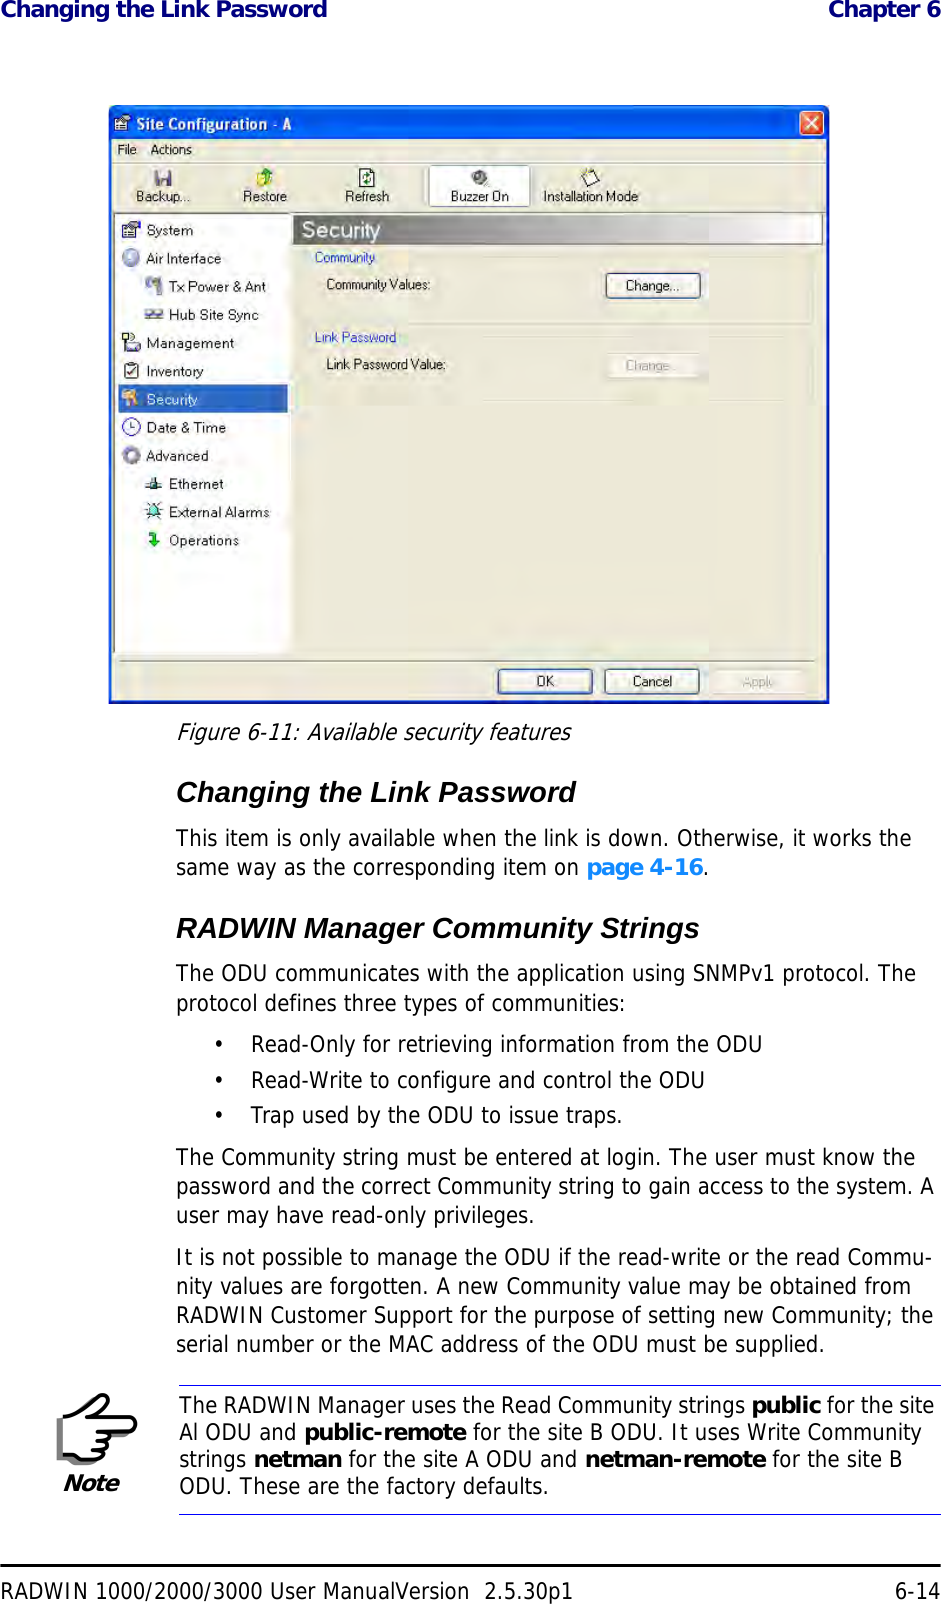 Changing the Link Password  Chapter 6RADWIN 1000/2000/3000 User ManualVersion  2.5.30p1 6-14 Figure 6-11: Available security featuresChanging the Link PasswordThis item is only available when the link is down. Otherwise, it works the same way as the corresponding item on page 4-16.RADWIN Manager Community StringsThe ODU communicates with the application using SNMPv1 protocol. The protocol defines three types of communities:• Read-Only for retrieving information from the ODU• Read-Write to configure and control the ODU• Trap used by the ODU to issue traps.The Community string must be entered at login. The user must know the password and the correct Community string to gain access to the system. A user may have read-only privileges.It is not possible to manage the ODU if the read-write or the read Commu-nity values are forgotten. A new Community value may be obtained from RADWIN Customer Support for the purpose of setting new Community; the serial number or the MAC address of the ODU must be supplied.NoteThe RADWIN Manager uses the Read Community strings public for the site Al ODU and public-remote for the site B ODU. It uses Write Community strings netman for the site A ODU and netman-remote for the site B ODU. These are the factory defaults.